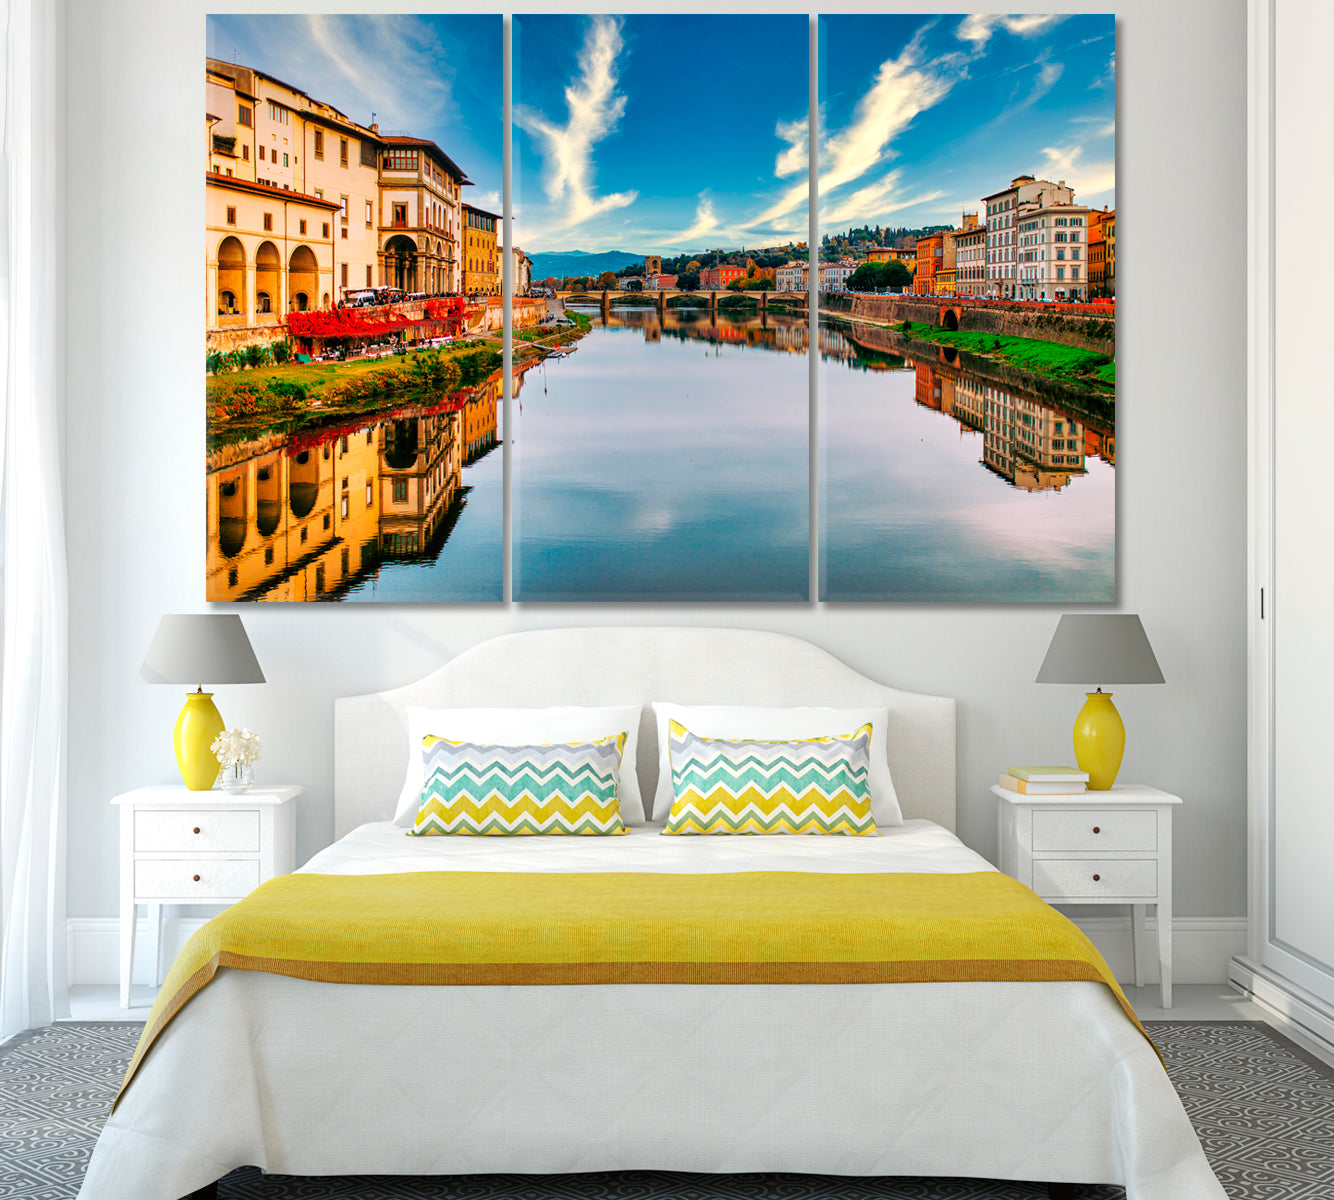 Arno River in Florence Canvas Print ArtLexy 3 Panels 36"x24" inches 